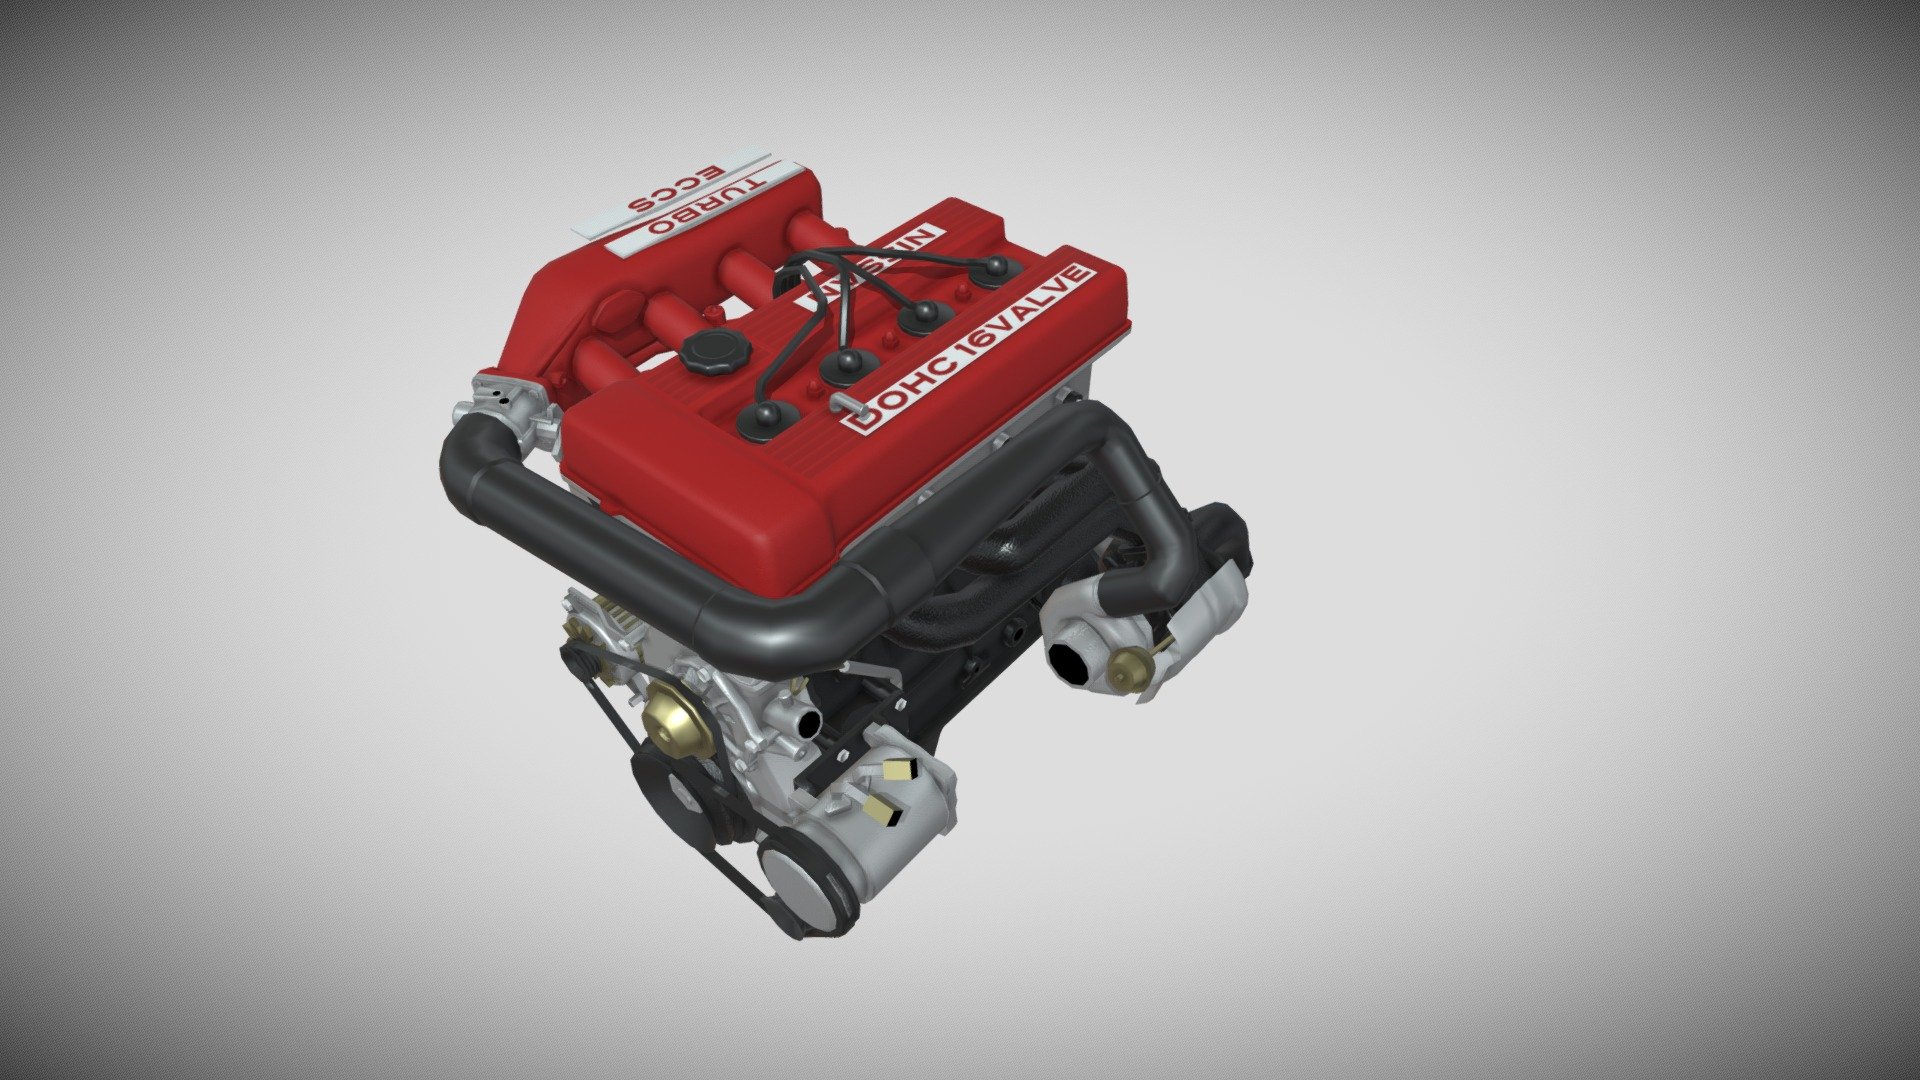 1980's Nissan FJ20ET engine, used in the RS and RS Turbo DR30 Nissan Skyline, and the S12 Nissan Silvia. Was eventually replaced by the CA18 and SR20 for the S13-15 generations of the Silvia and by the RB series I6 on the following Skyline generations. This model is low poly, has baked normals, and its fairly complete 3d model